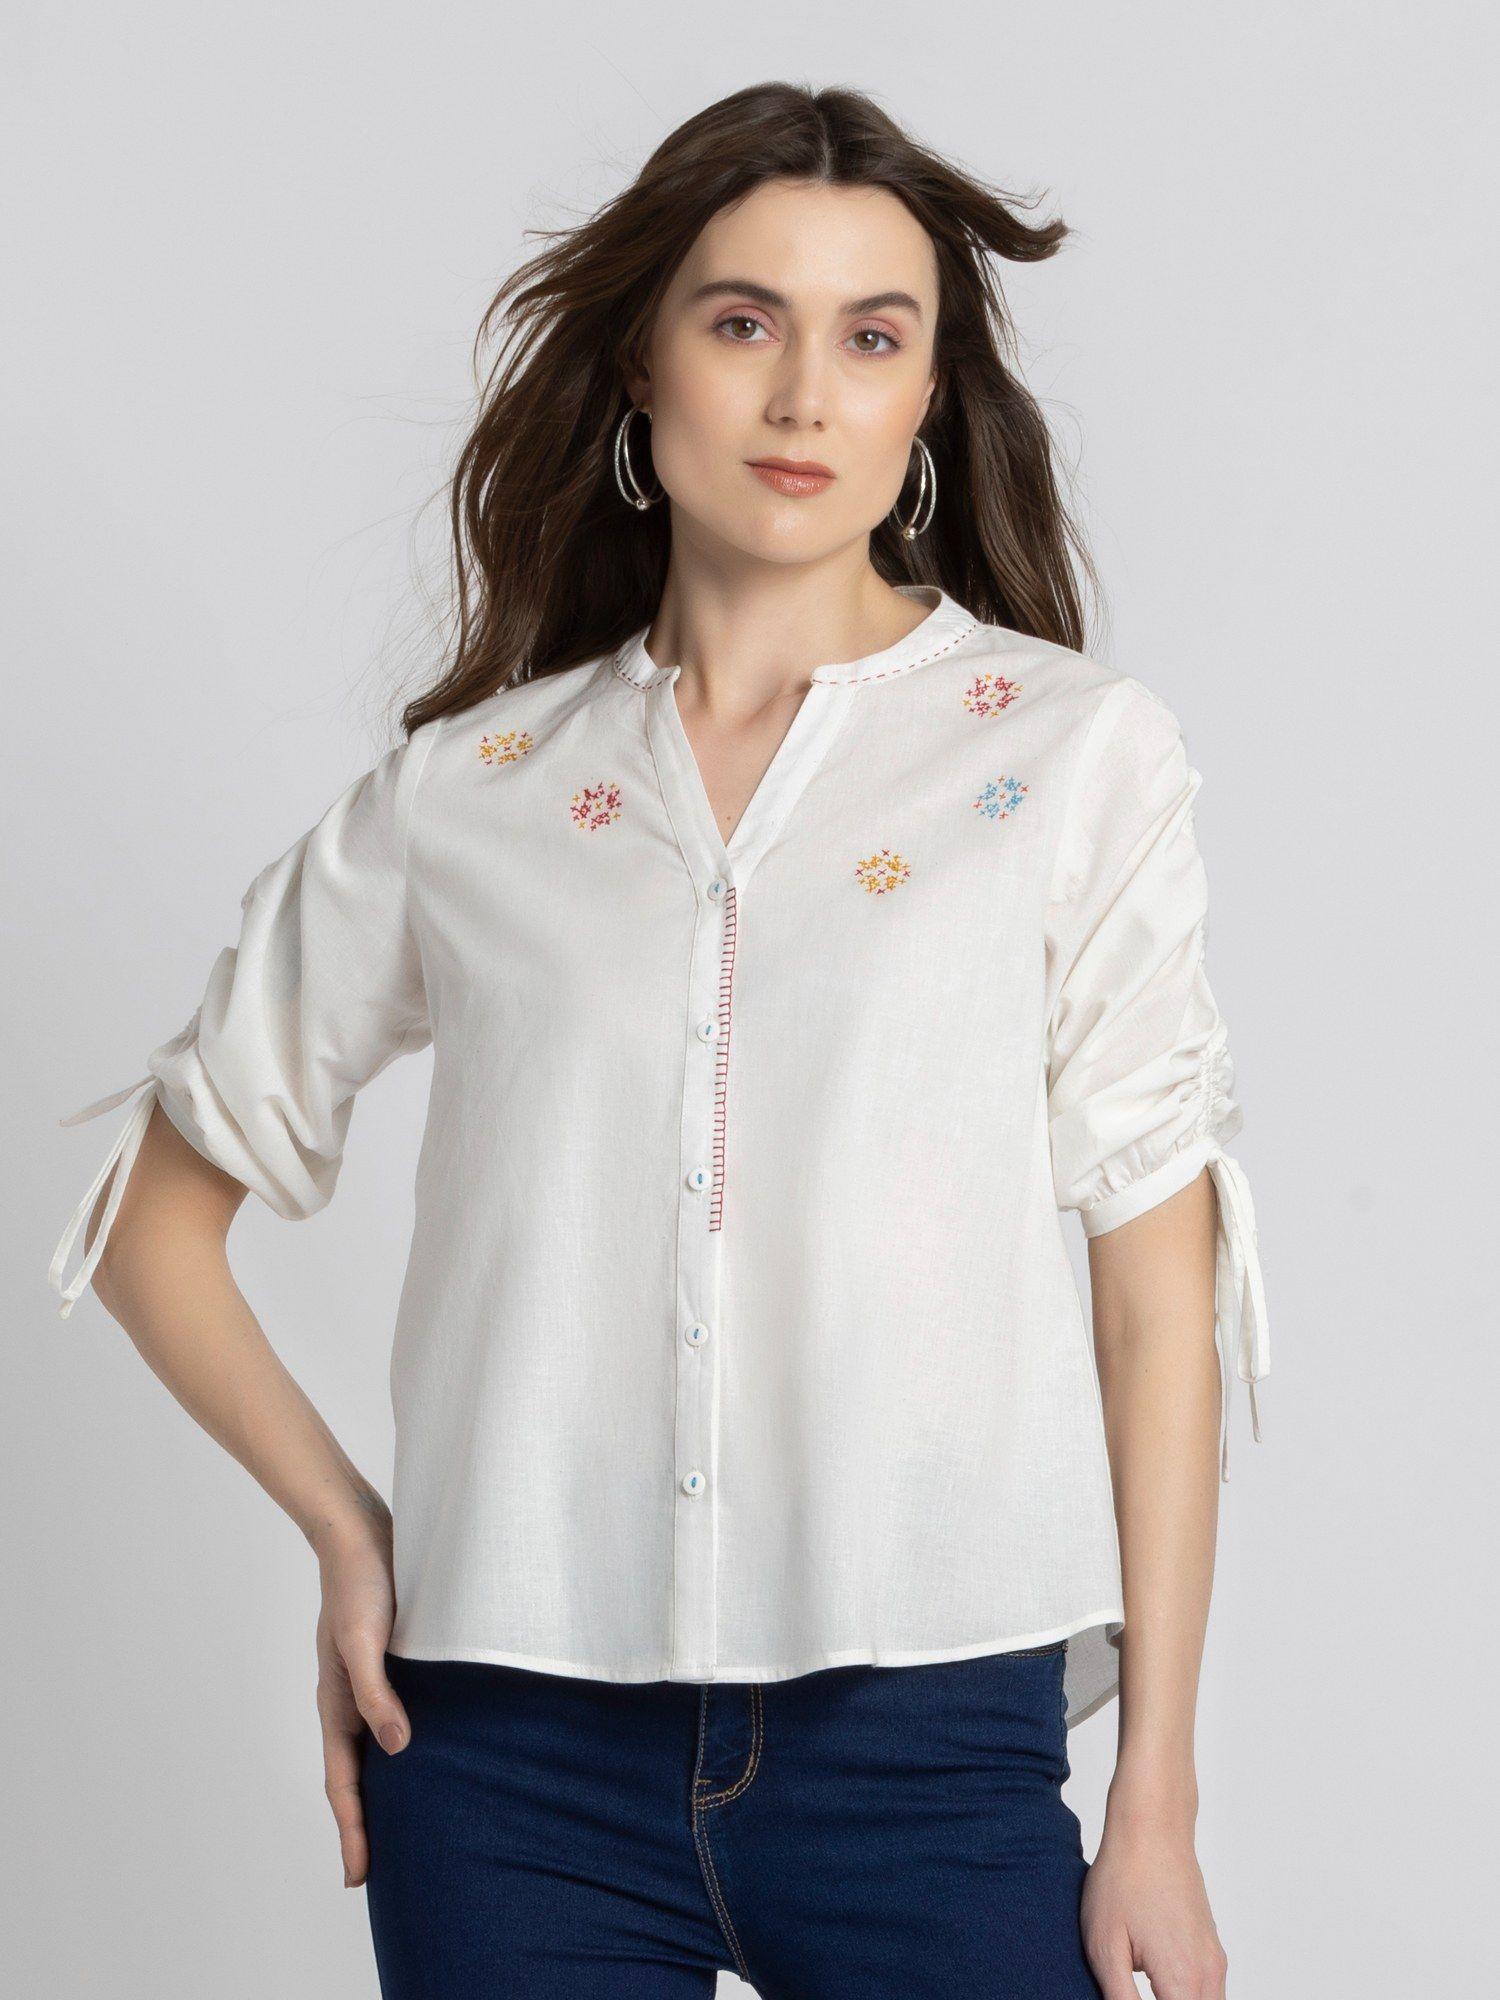 band collar white embroidered three-quarter sleeves casual shirt for women